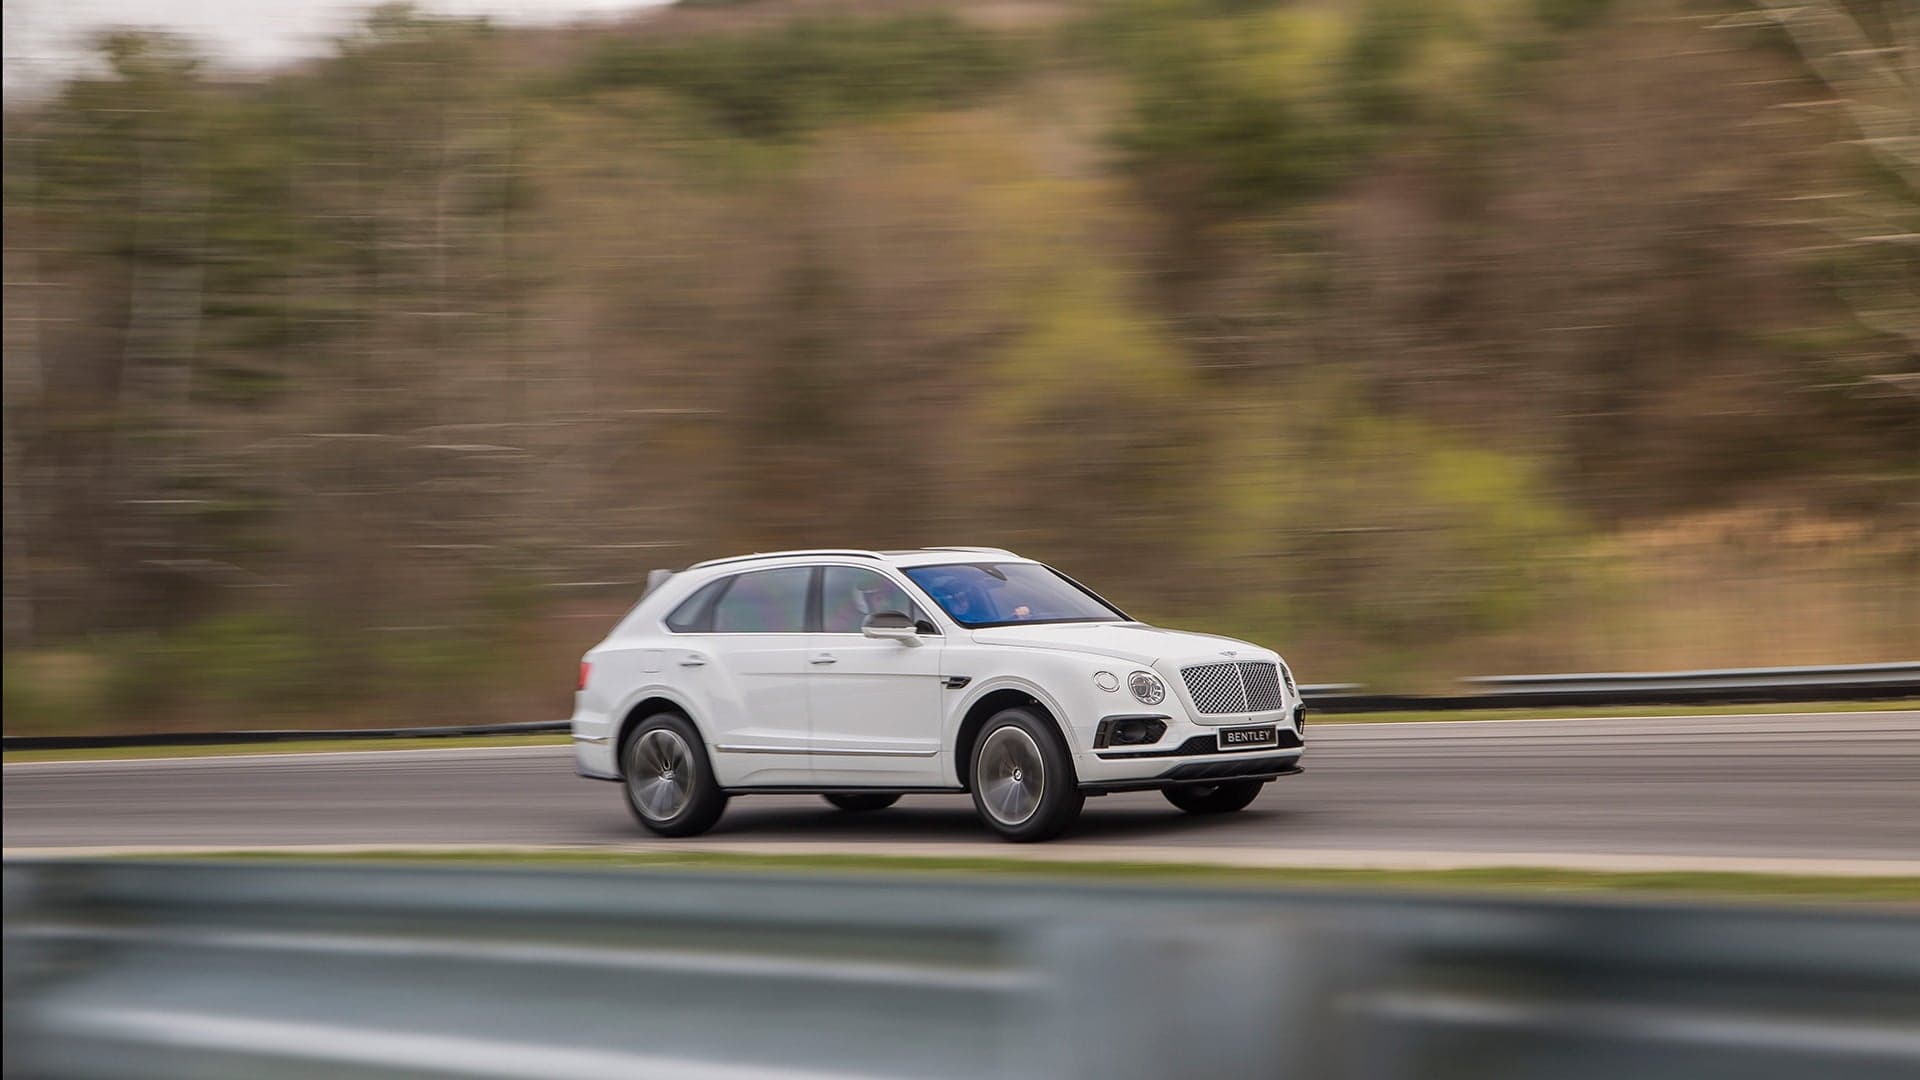 We Tracked the Fastest SUV in the World